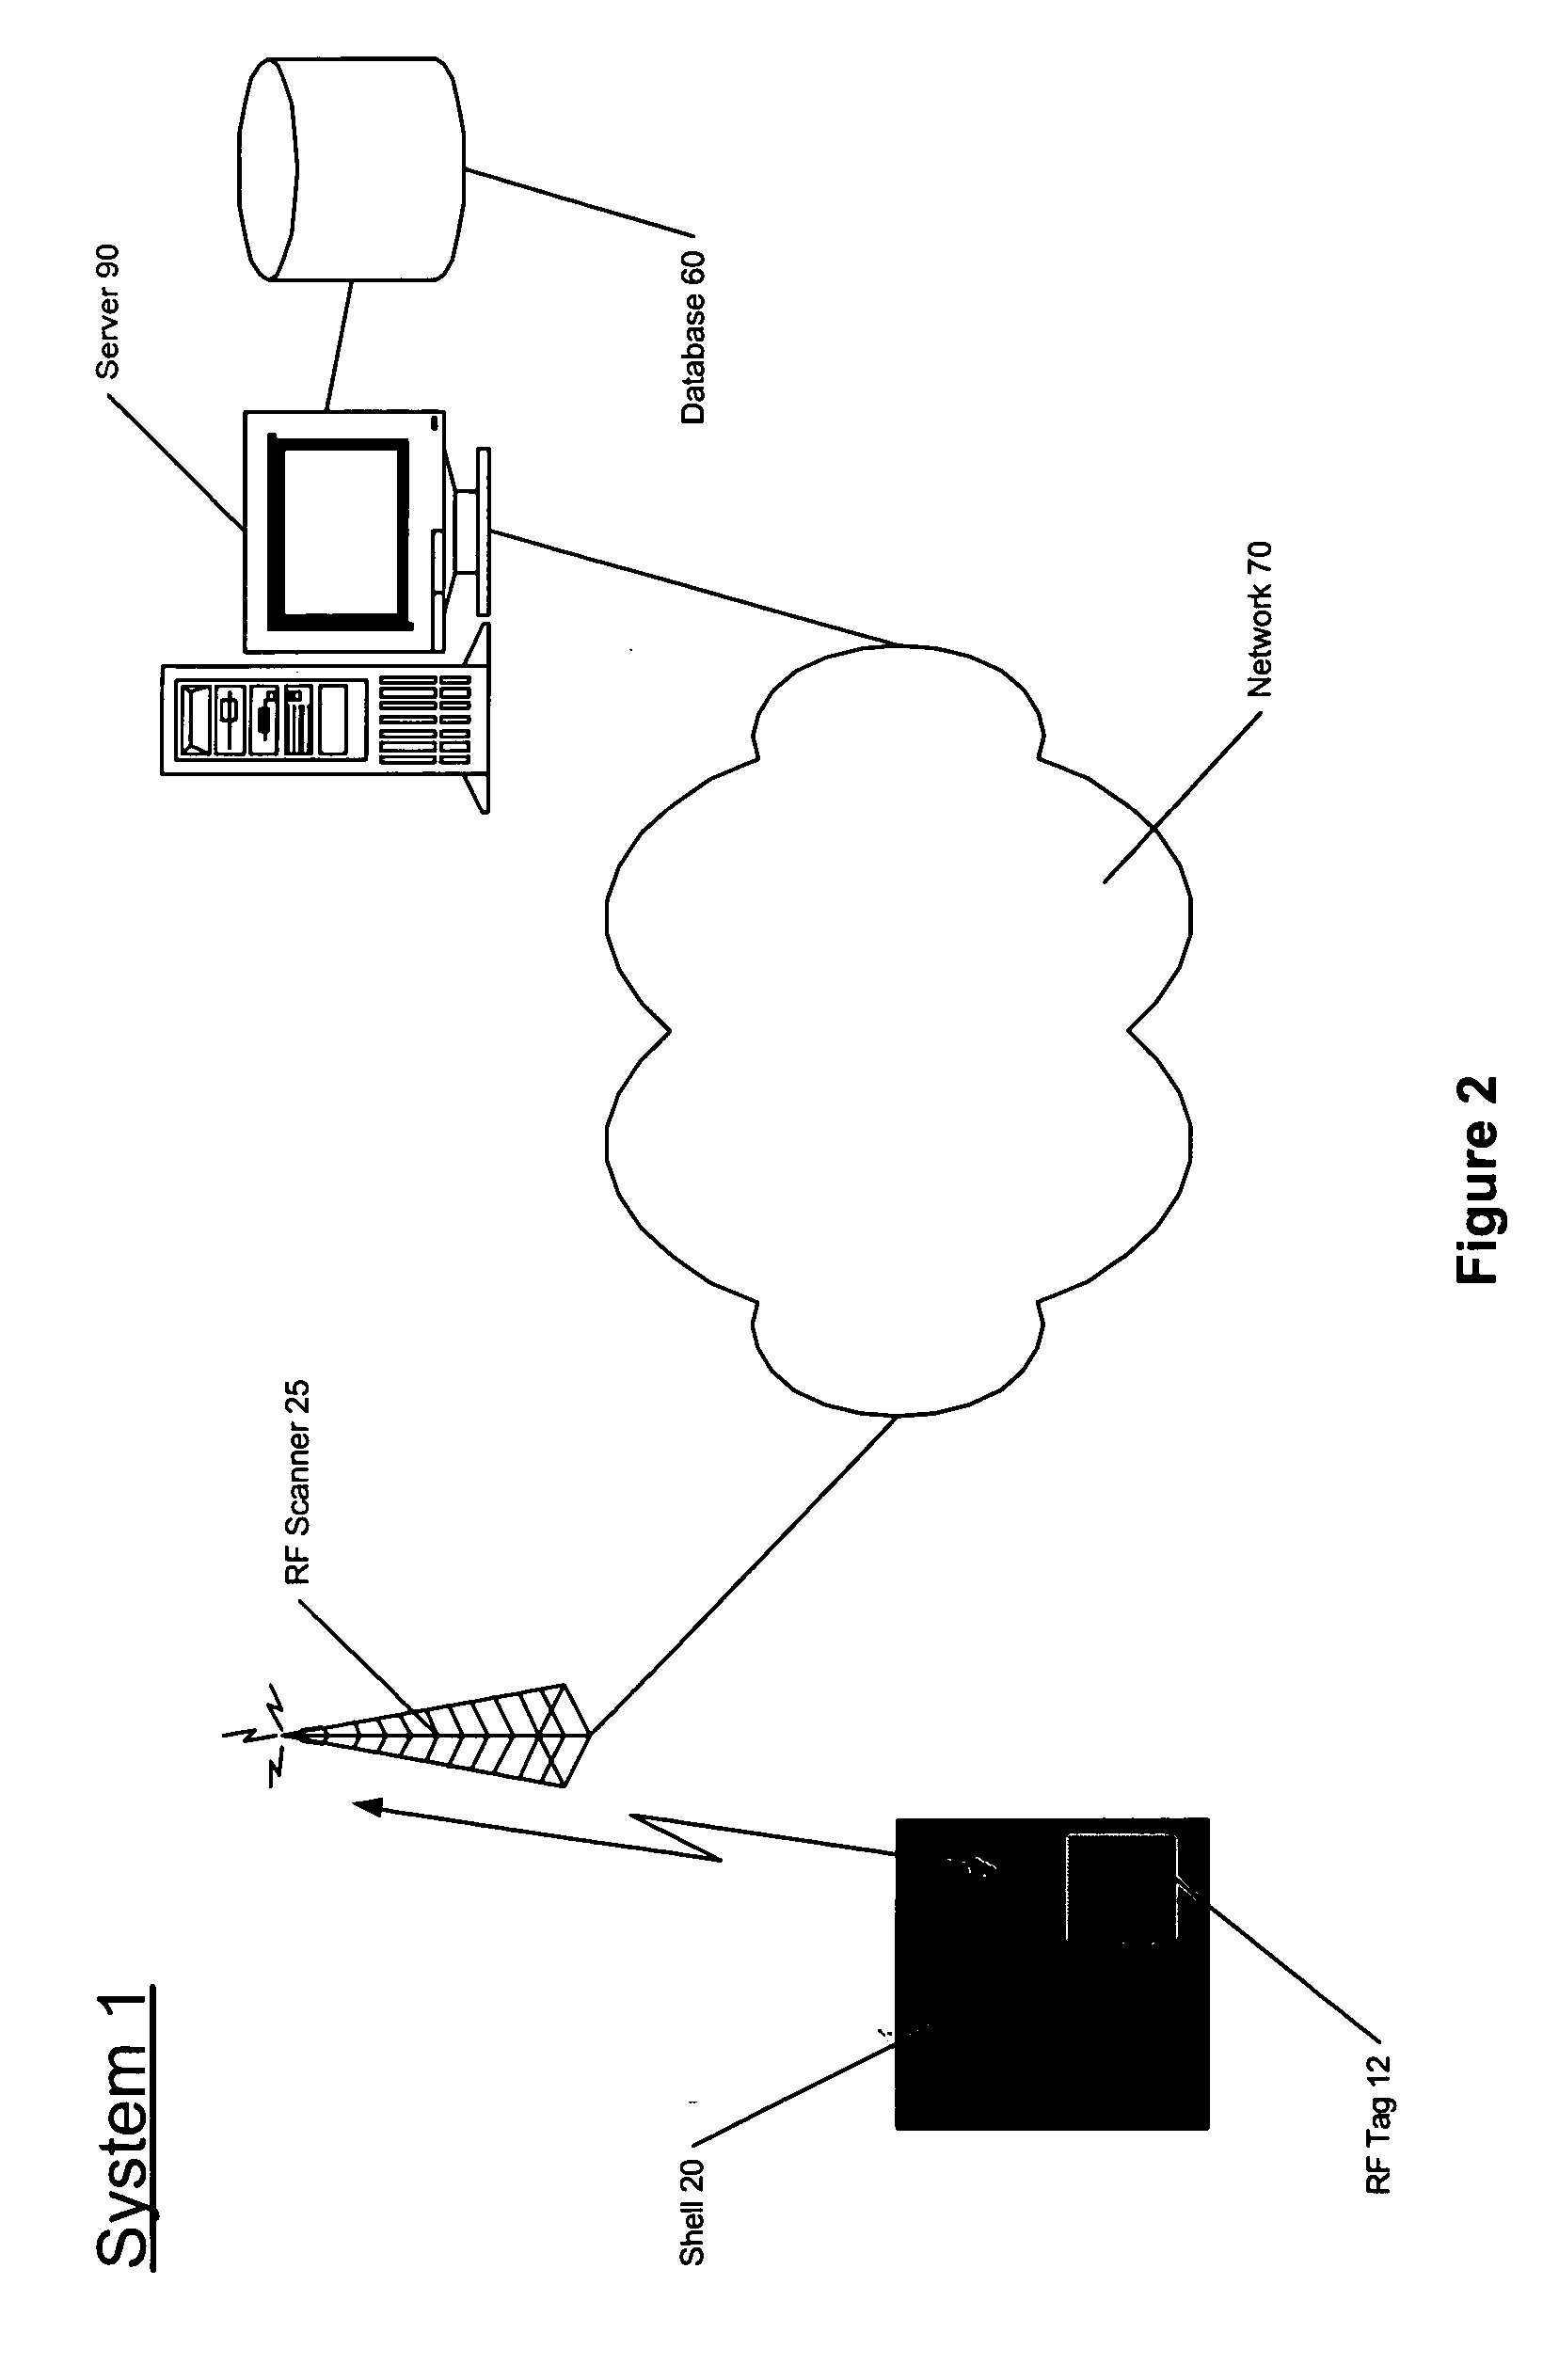 System and method for tracking data related to containers using RF technology